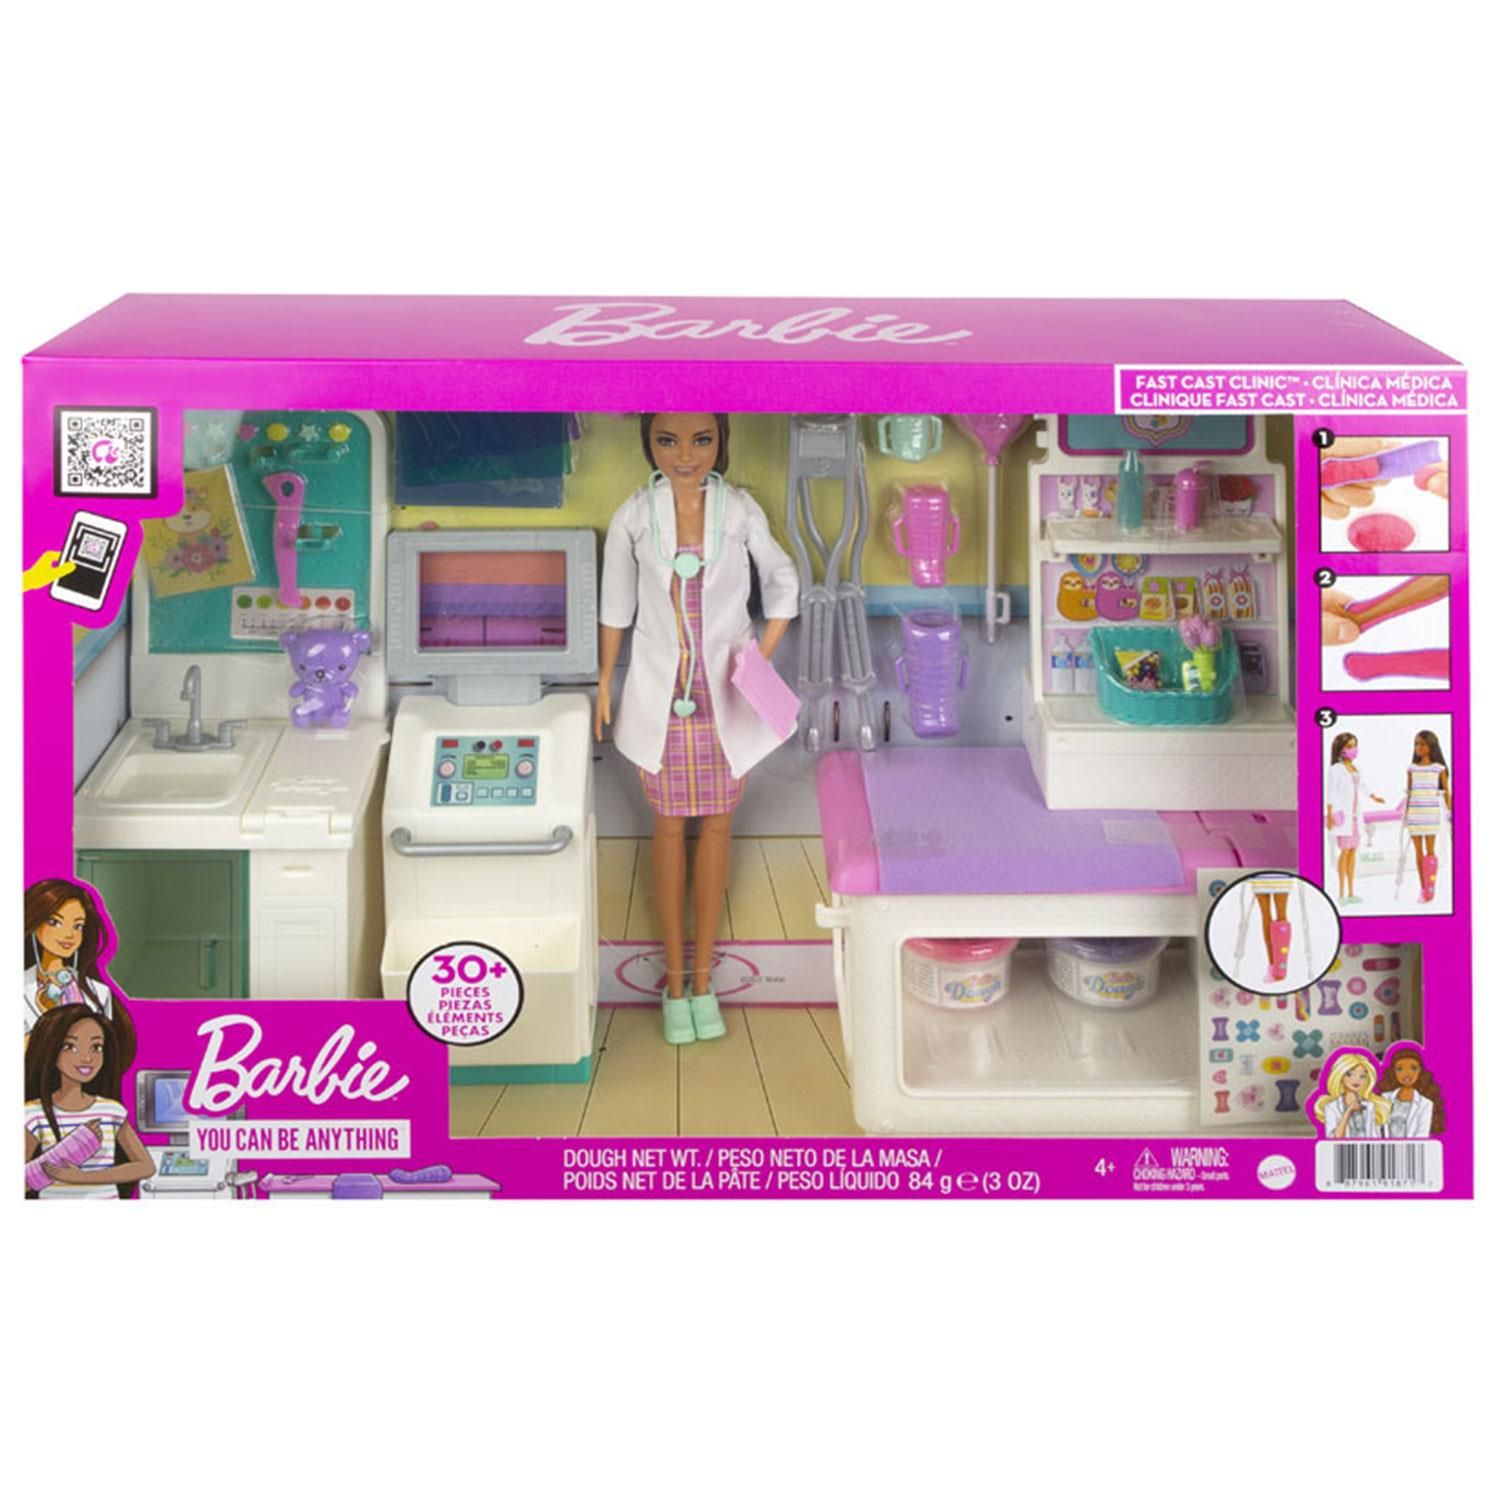 Kids can have all sorts of medicine-themed fun with the Barbie Fast Cast Clinic playset! This playset features a brunette Barbie doctor doll and four play areas - medical station, exam table, X-ray machine, and gift shop - for kids to create their own doctor-patient stories! Kids can make colorful casts for their Barbie doll patients (sold separately) with the cast-making feature. This Barbie playset includes 30+ toy accessories and pieces, including dough containers, crutches, stickers, and more! Makes an excellent gift for kids aged 3+.

​Explore a world of taking care of others with the Barbie Fast Cast Clinic playset
​Wearing a cute plaid dress, white doctor's coat, and sporting a stethoscope and clipboard, the Barbie doctor doll (12-in/30.40-cm) is ready to take care of patients
​Barbie doctor doll can prepare at her medical station, take X-rays and check patients on the exam table
​When she determines a patient has a broken arm or leg, she can make a pink, purple, or white cast with the dough and cast-making accessories! There are also stickers to decorate the patient's cast
​Barbie doctor doll can also use dough in the bandage-making station to create a wrap for her patient injuries as well!
​When she determines a patient has a broken arm or leg, she can make a pink, purple, or white cast with the dough and cast-making accessories! There are also stickers to decorate the patient's cast
​Some of the accessories feature a clip so Barbie doctor doll can hold them for even more realistic play
​Makes a great gift for kids 3 years old and up, especially those interested in the medical field and helping others

Box Contains:
1x Barbie Fast Cast Clinic Playset with Brunette Barbie Doctor Doll
4x Play Areas
30x Play Pieces including dough containers, crutches, stickers, and more